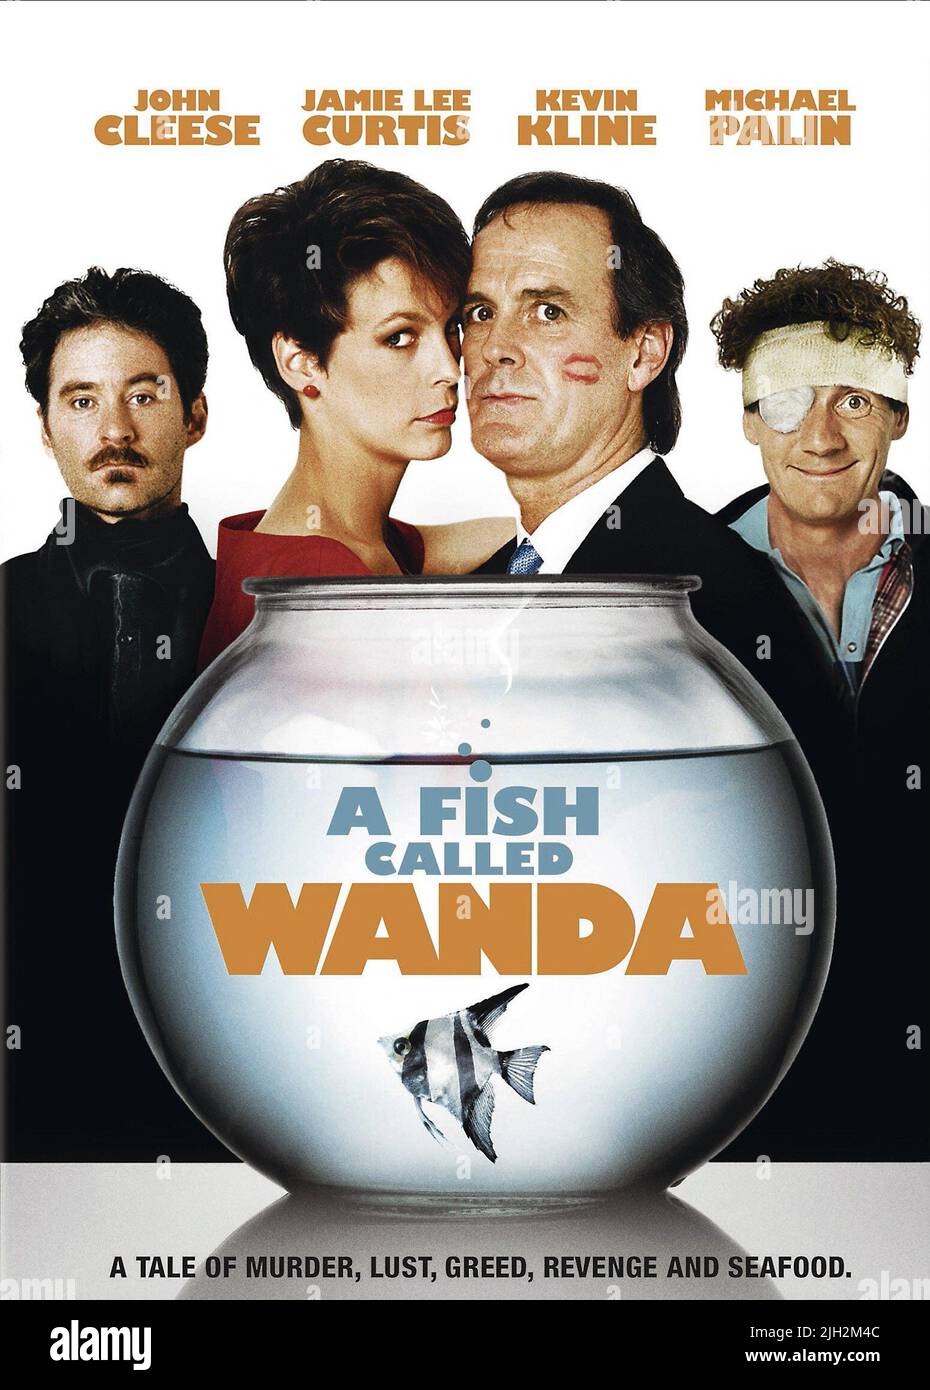 KLINE,CURTIS,CLEESE,POSTER, A FISH CALLED WANDA, 1988 Stock Photo